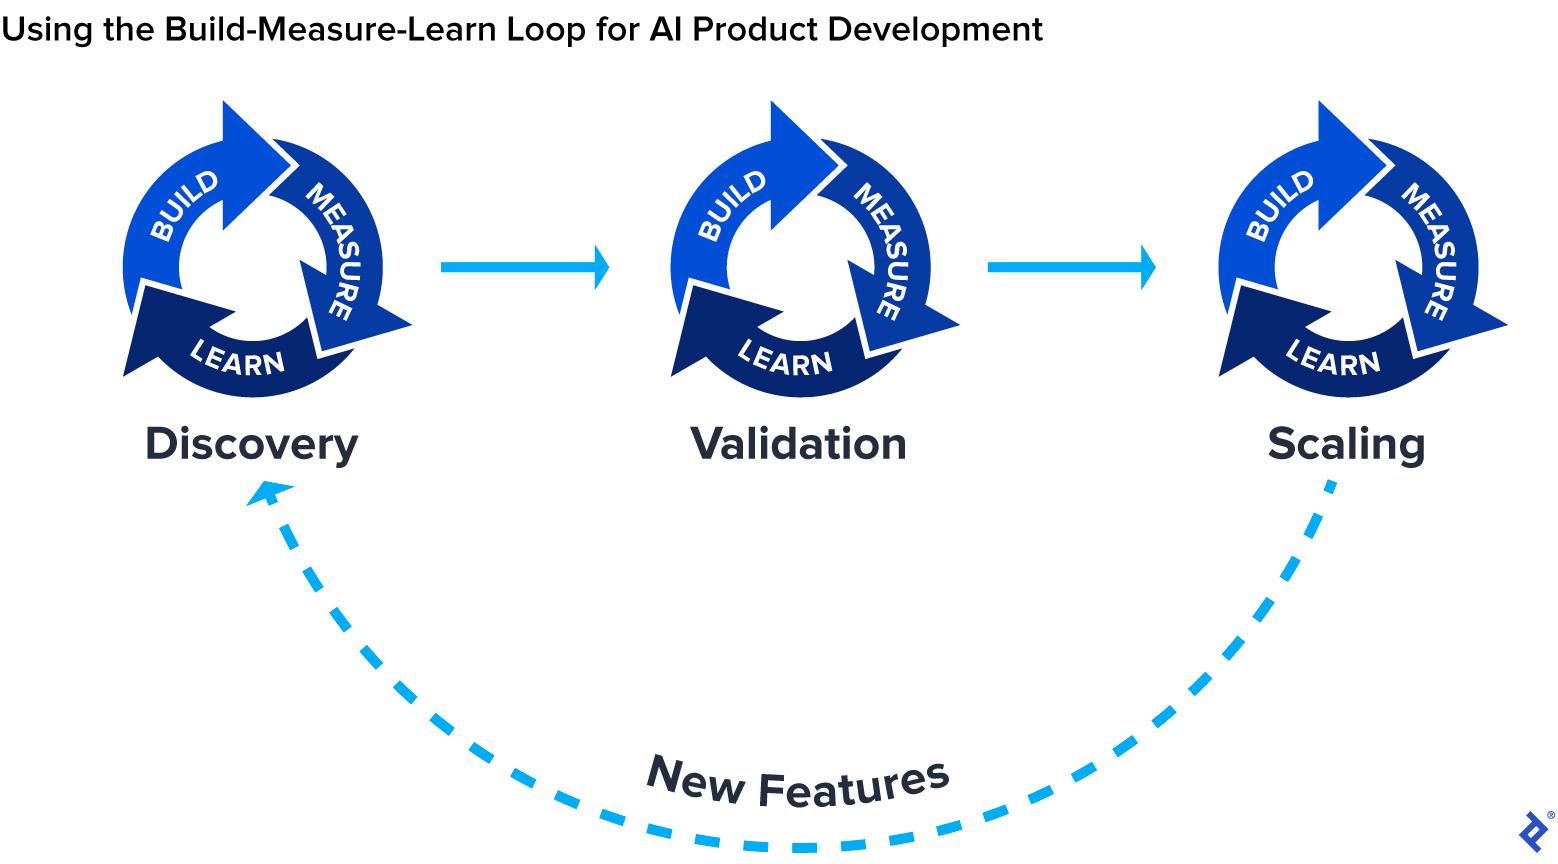 Using the Build-Measure-Learn Loop for AI Product Development includes âDiscovery,â âValidation,â and âScaling,â each with its own feedback loop.